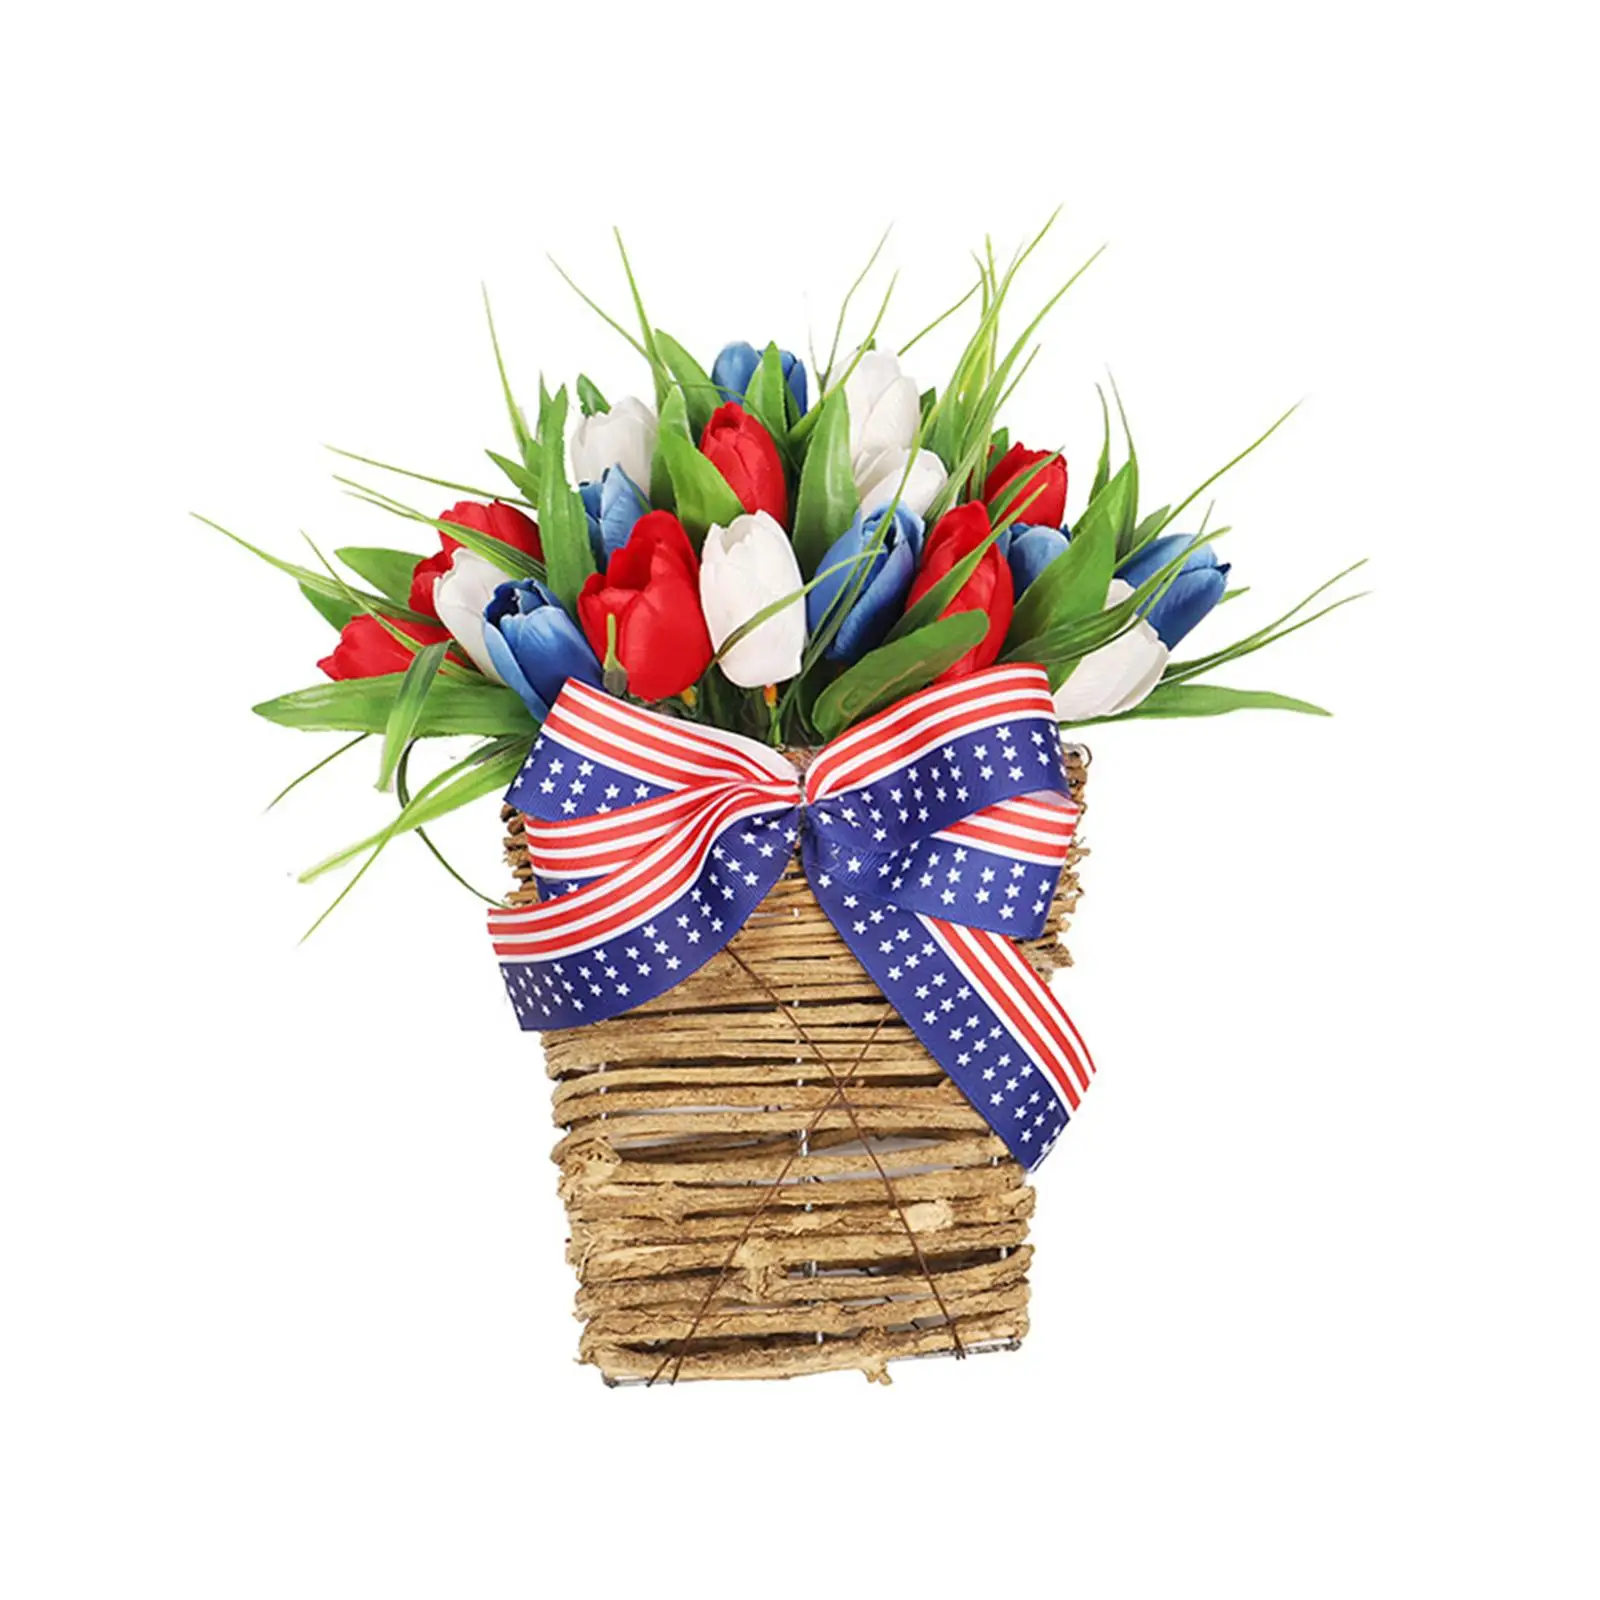 Patriotic Independence Day Wreath Decorative Greenery Handmade Hanging Ornament